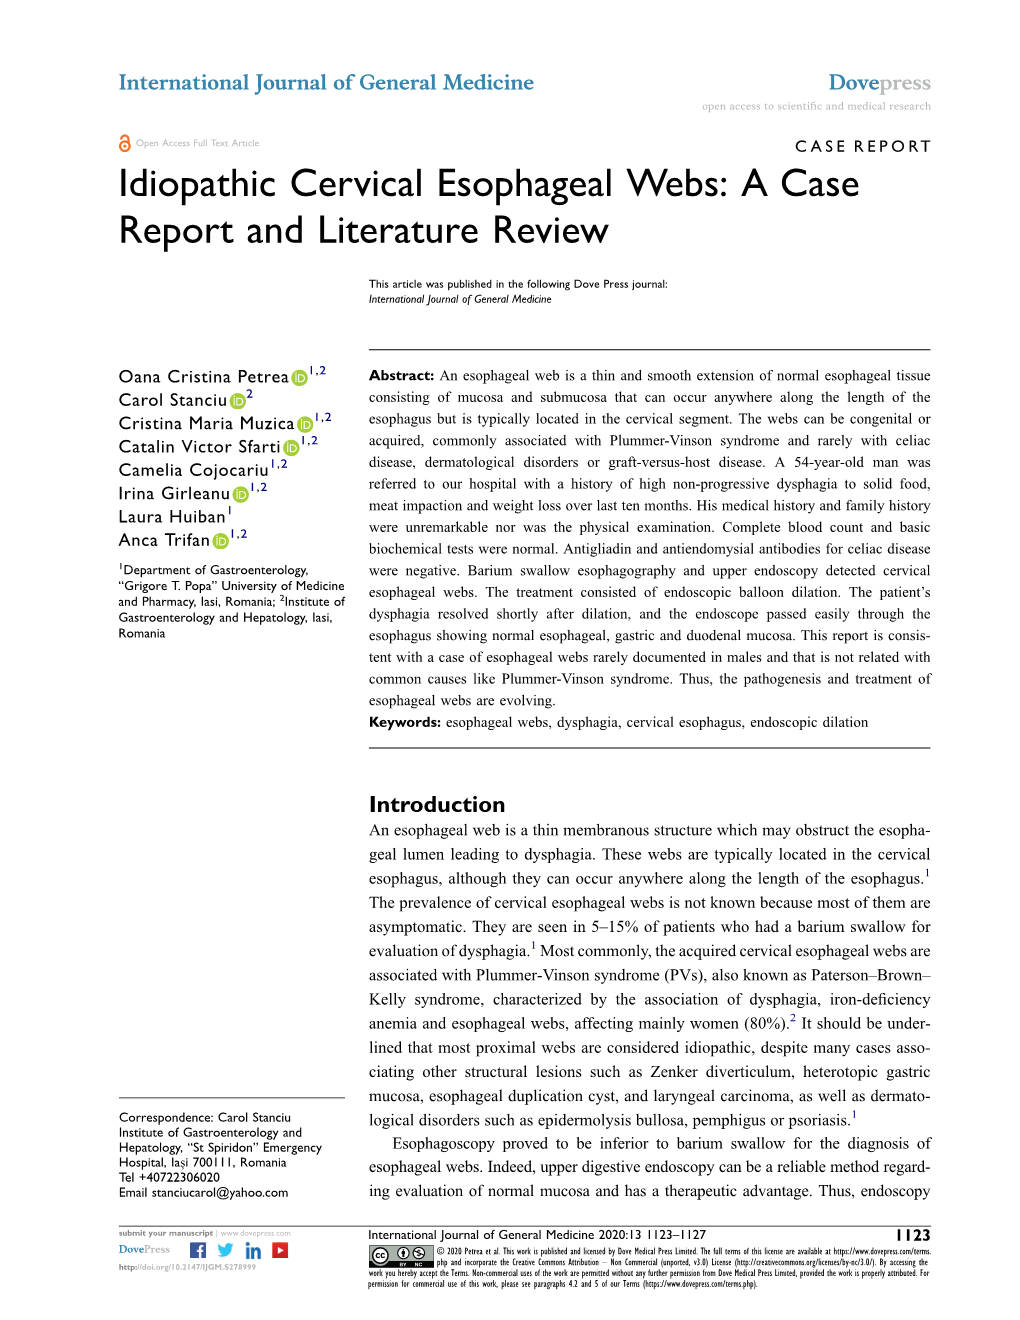 Idiopathic Cervical Esophageal Webs: a Case Report and Literature Review